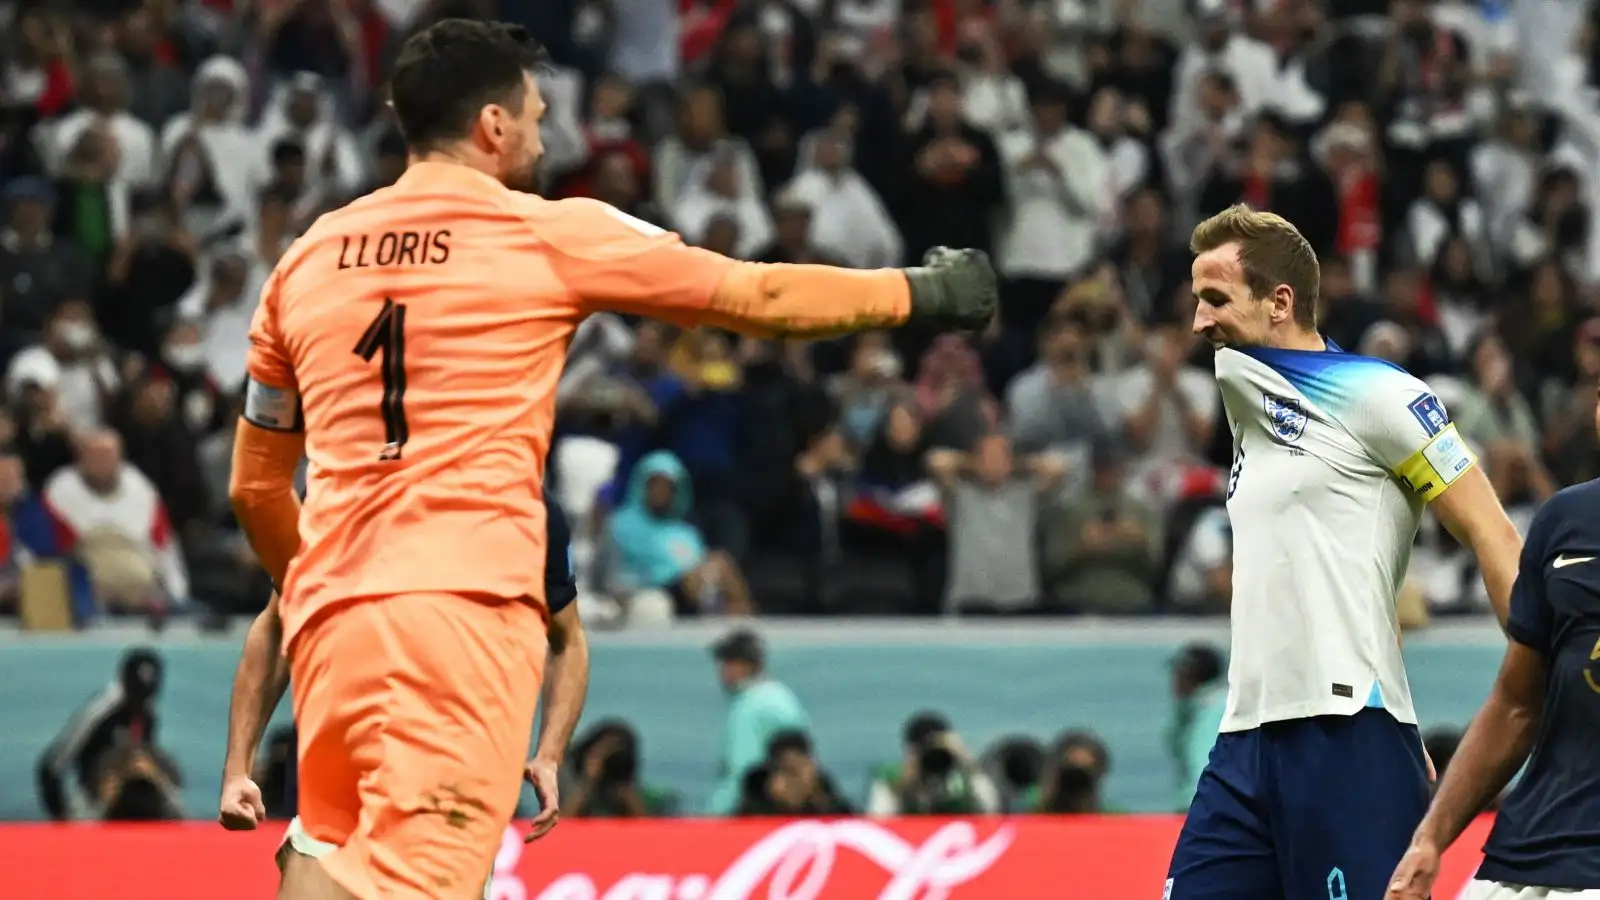 Hugo Lloris celebrates after Harry Kane misses a penalty for England against France in the World Cup quarter-final